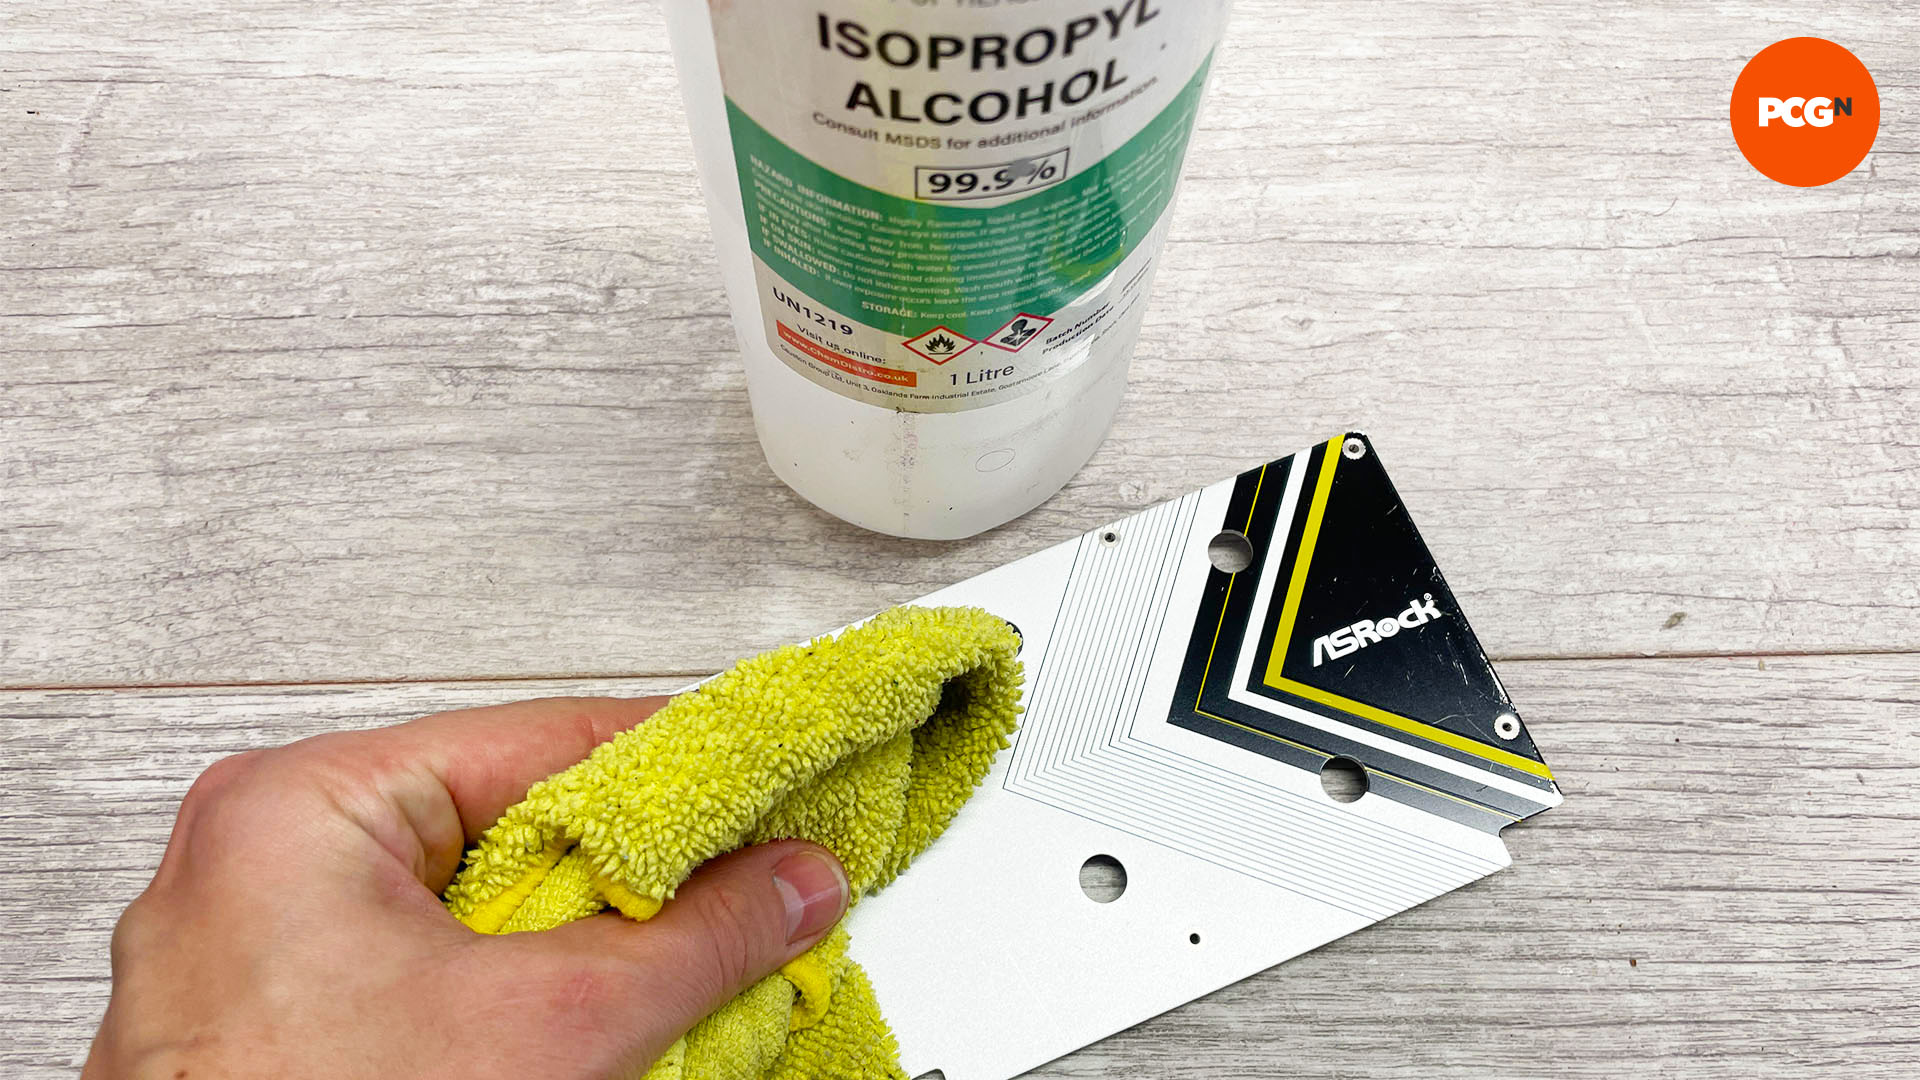 How to change your graphics card color: Clean surfaces with isopropyl alcohol